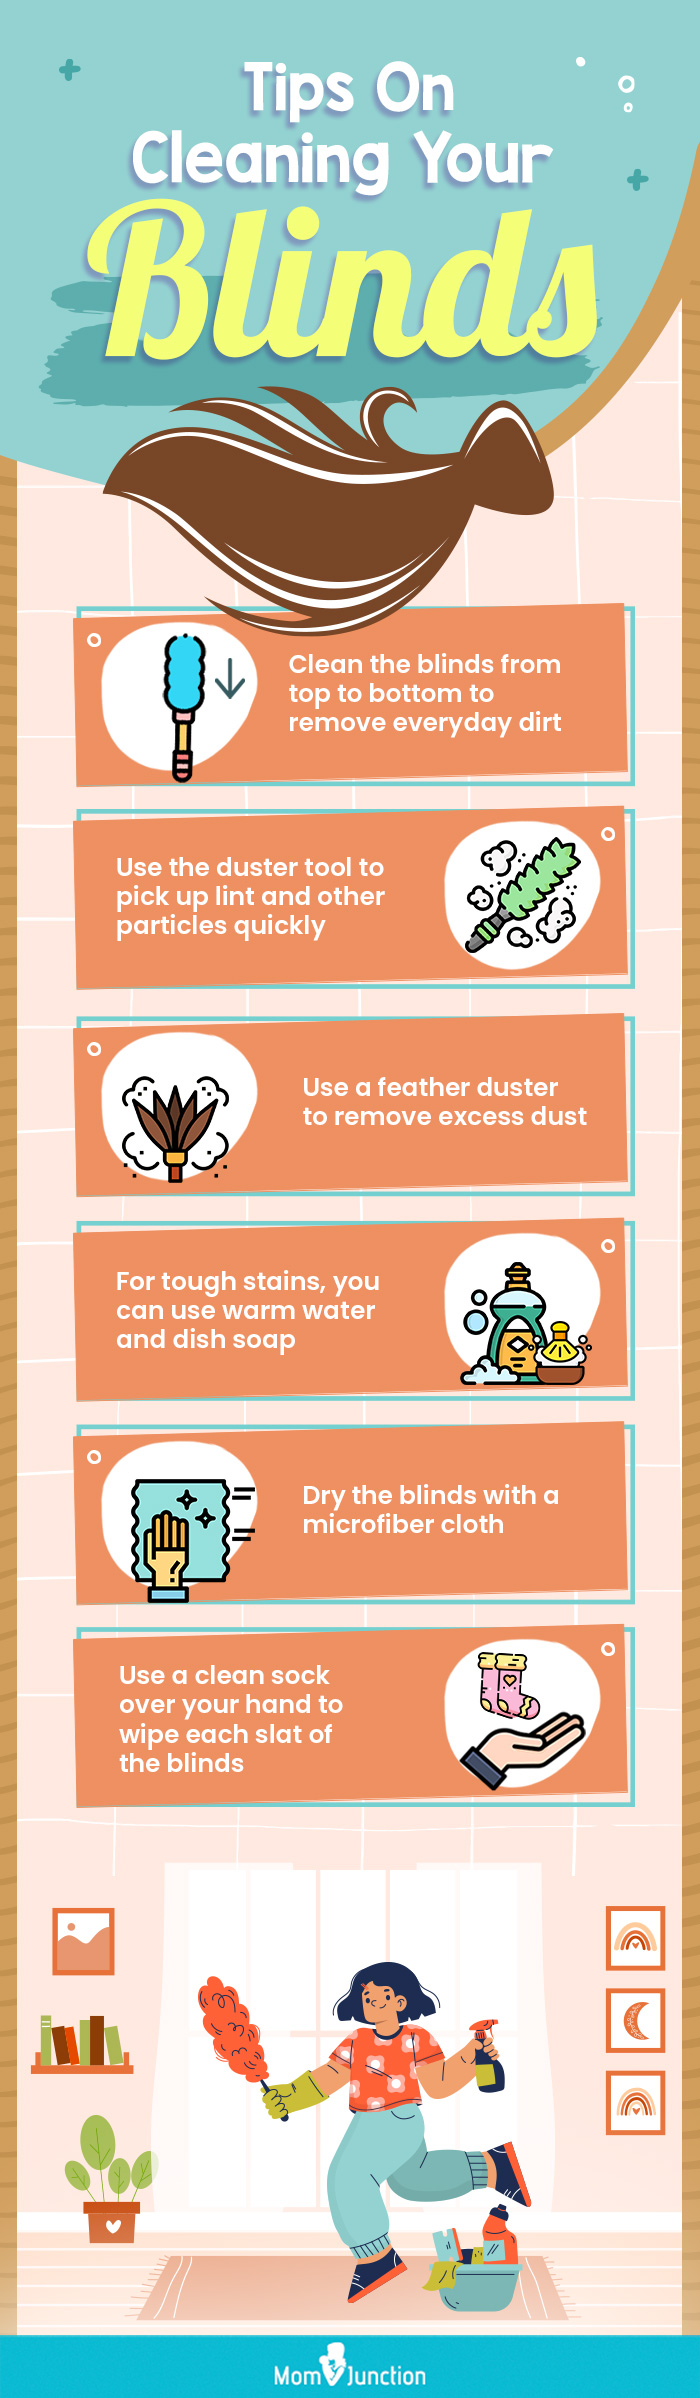 Tips On Cleaning Your Blinds (infographic)